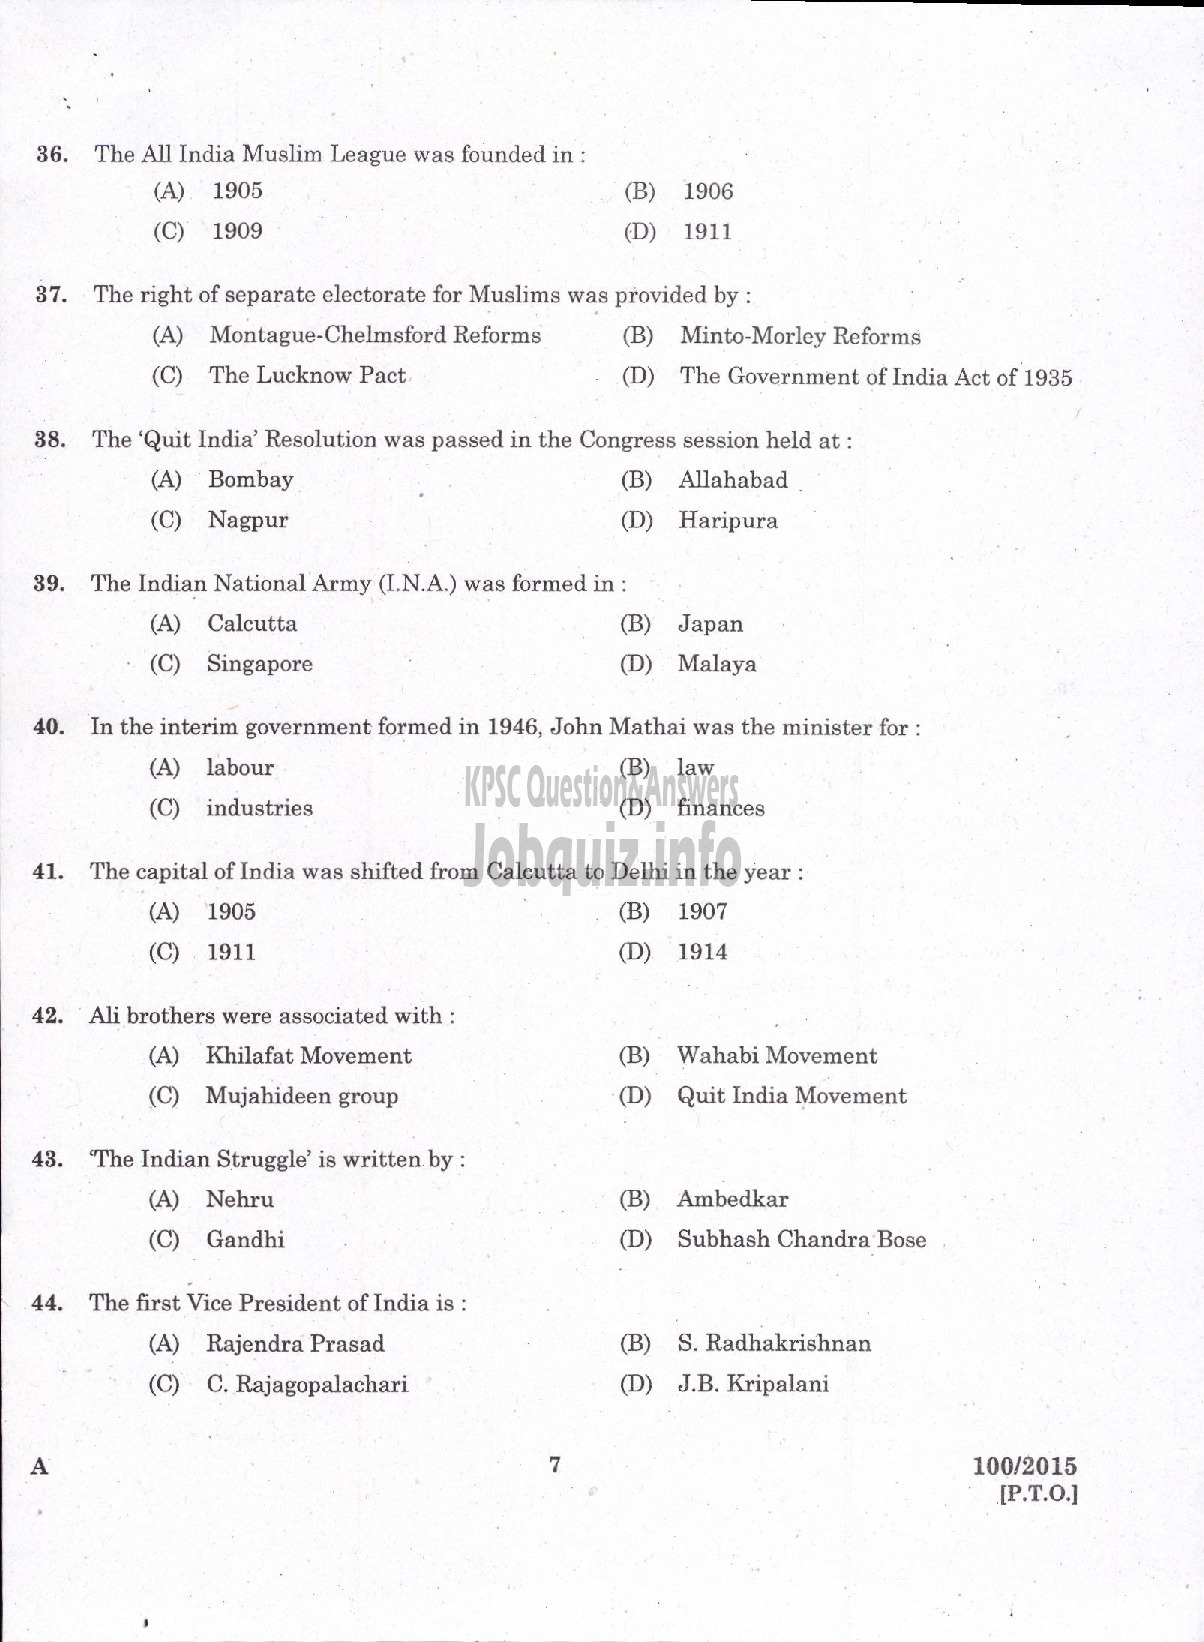 Kerala PSC Question Paper - TYYPIST GRADE II / STENO TYPIST / CLERK TYPIST / TYPIST KERALA STATE HOUSING BOARD / KERALA SHIPPING AND INLAND NAVIGATION CORP LTD / VARIOUS / KERALA ELECTRICAL AND ALLIED ENGINEERING COMPANY LTD-5